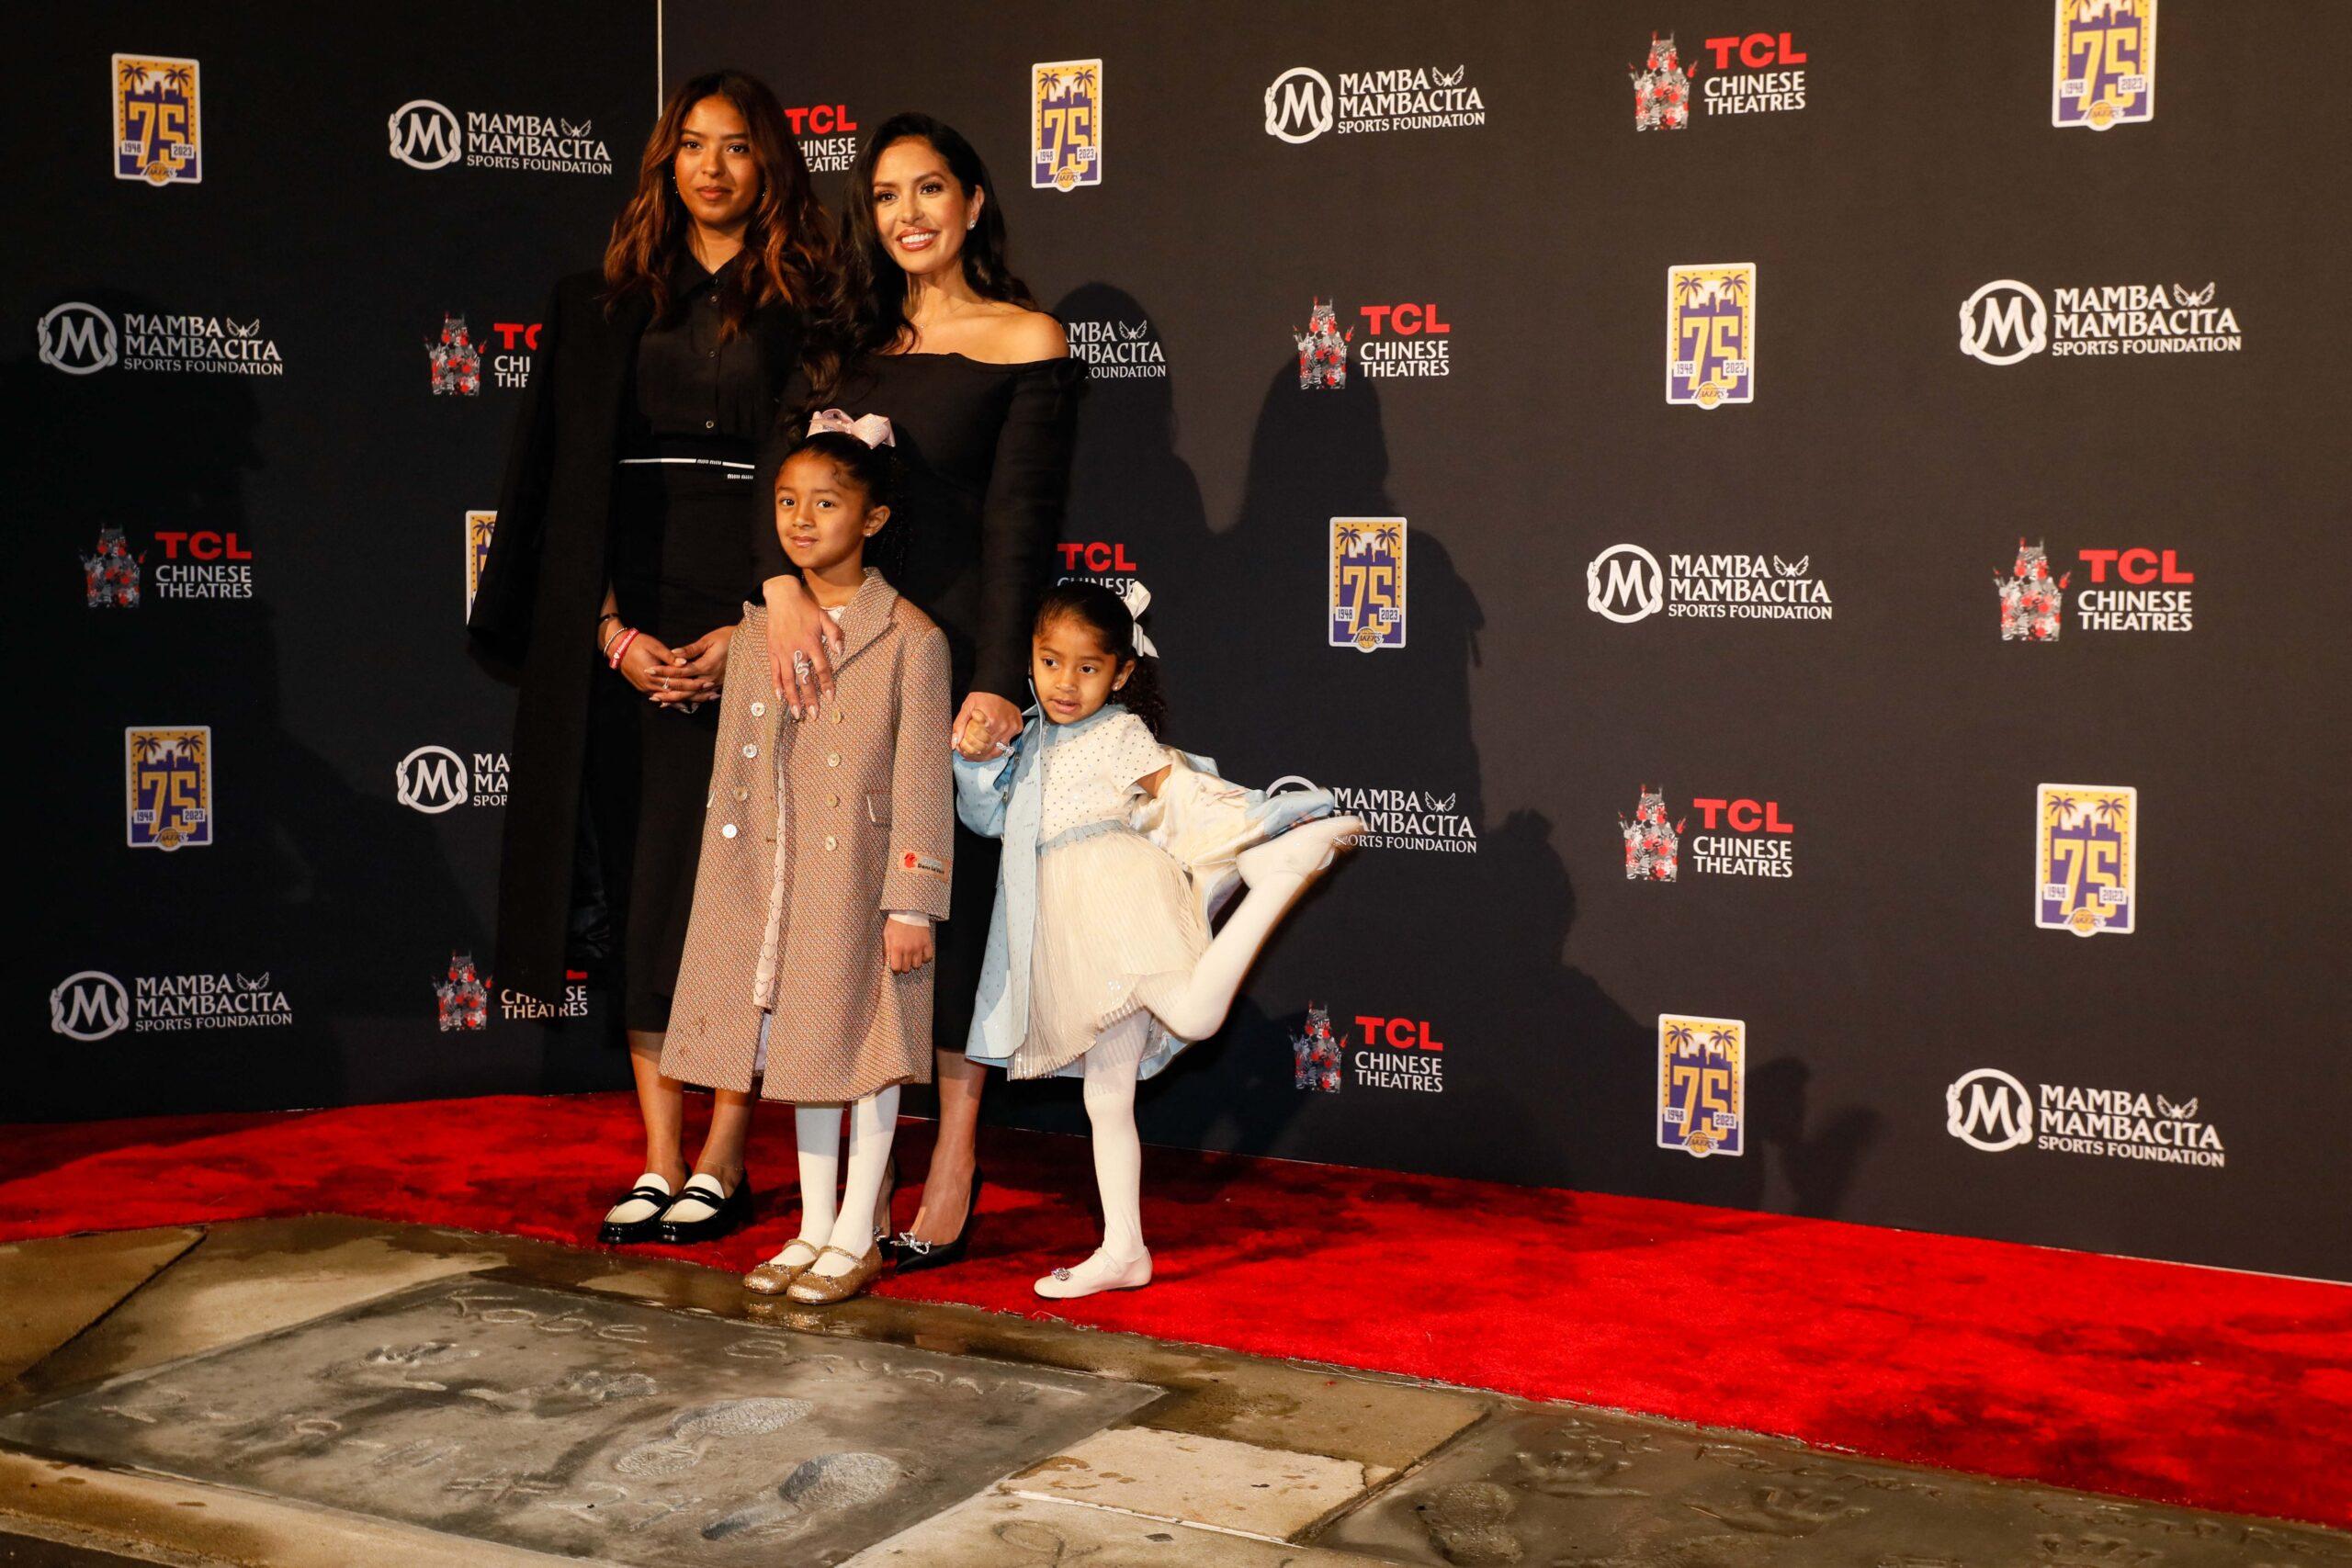 VANESSA BRYANT, right, and daughters (Left to right) NATALIA BRYANT, 20, BIANKA BRYANT, 6, CAPRI BRYANT, 3, at the hand and footprint ceremony for Kobe Bryant outside the TCL Chinese Theatre